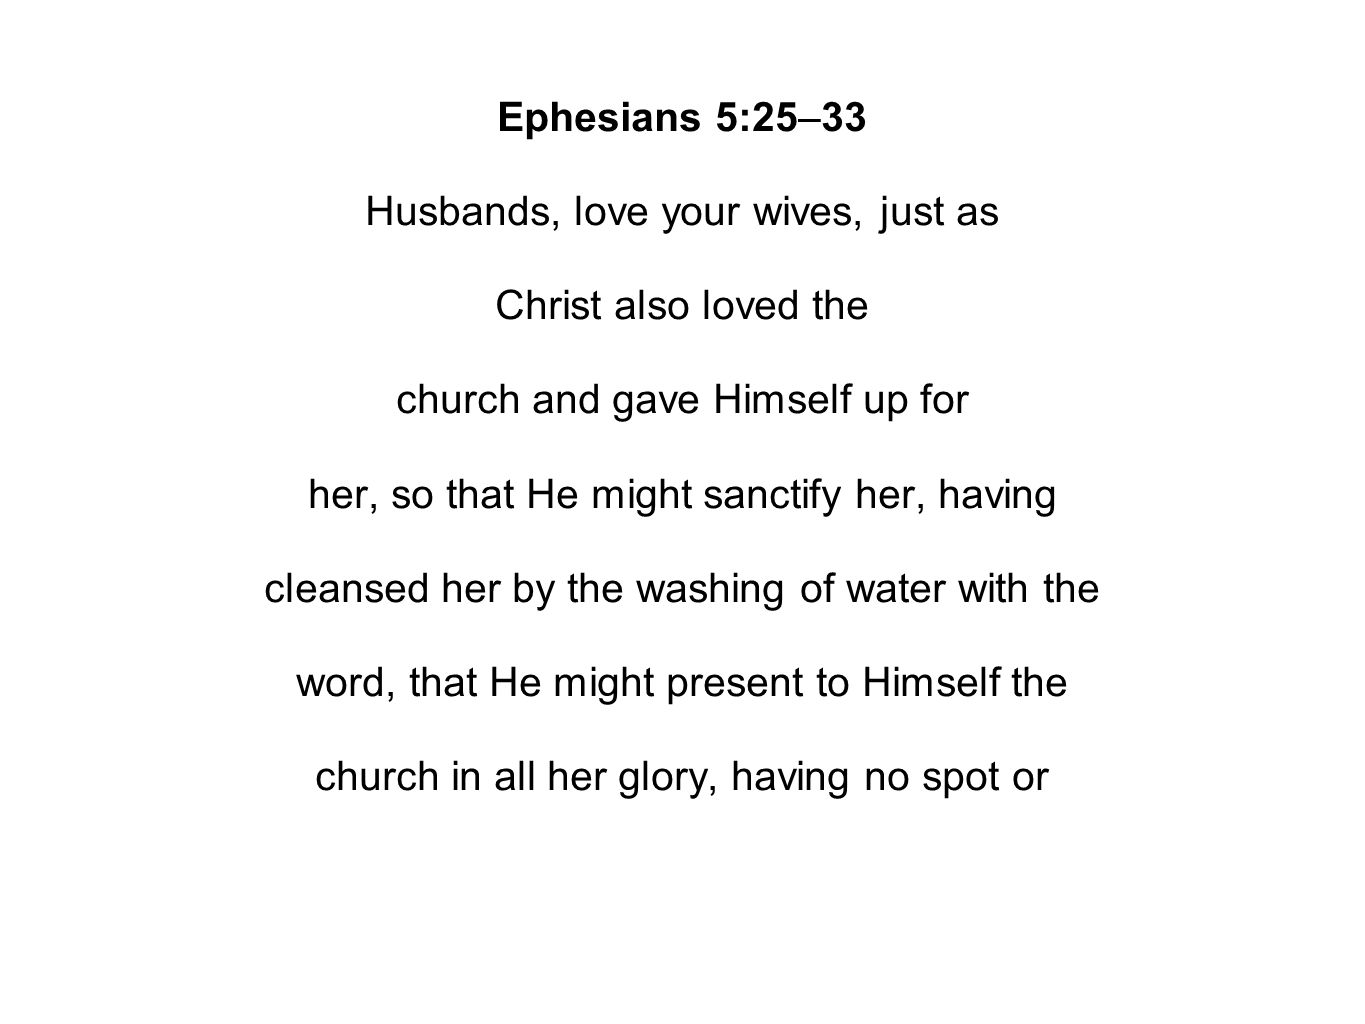 Ephesians 5:25–33 Husbands, love your wives, just as Christ also loved the church and gave Himself up for her, so that He might sanctify her, having cleansed her by the washing of water with the word, that He might present to Himself the church in all her glory, having no spot or